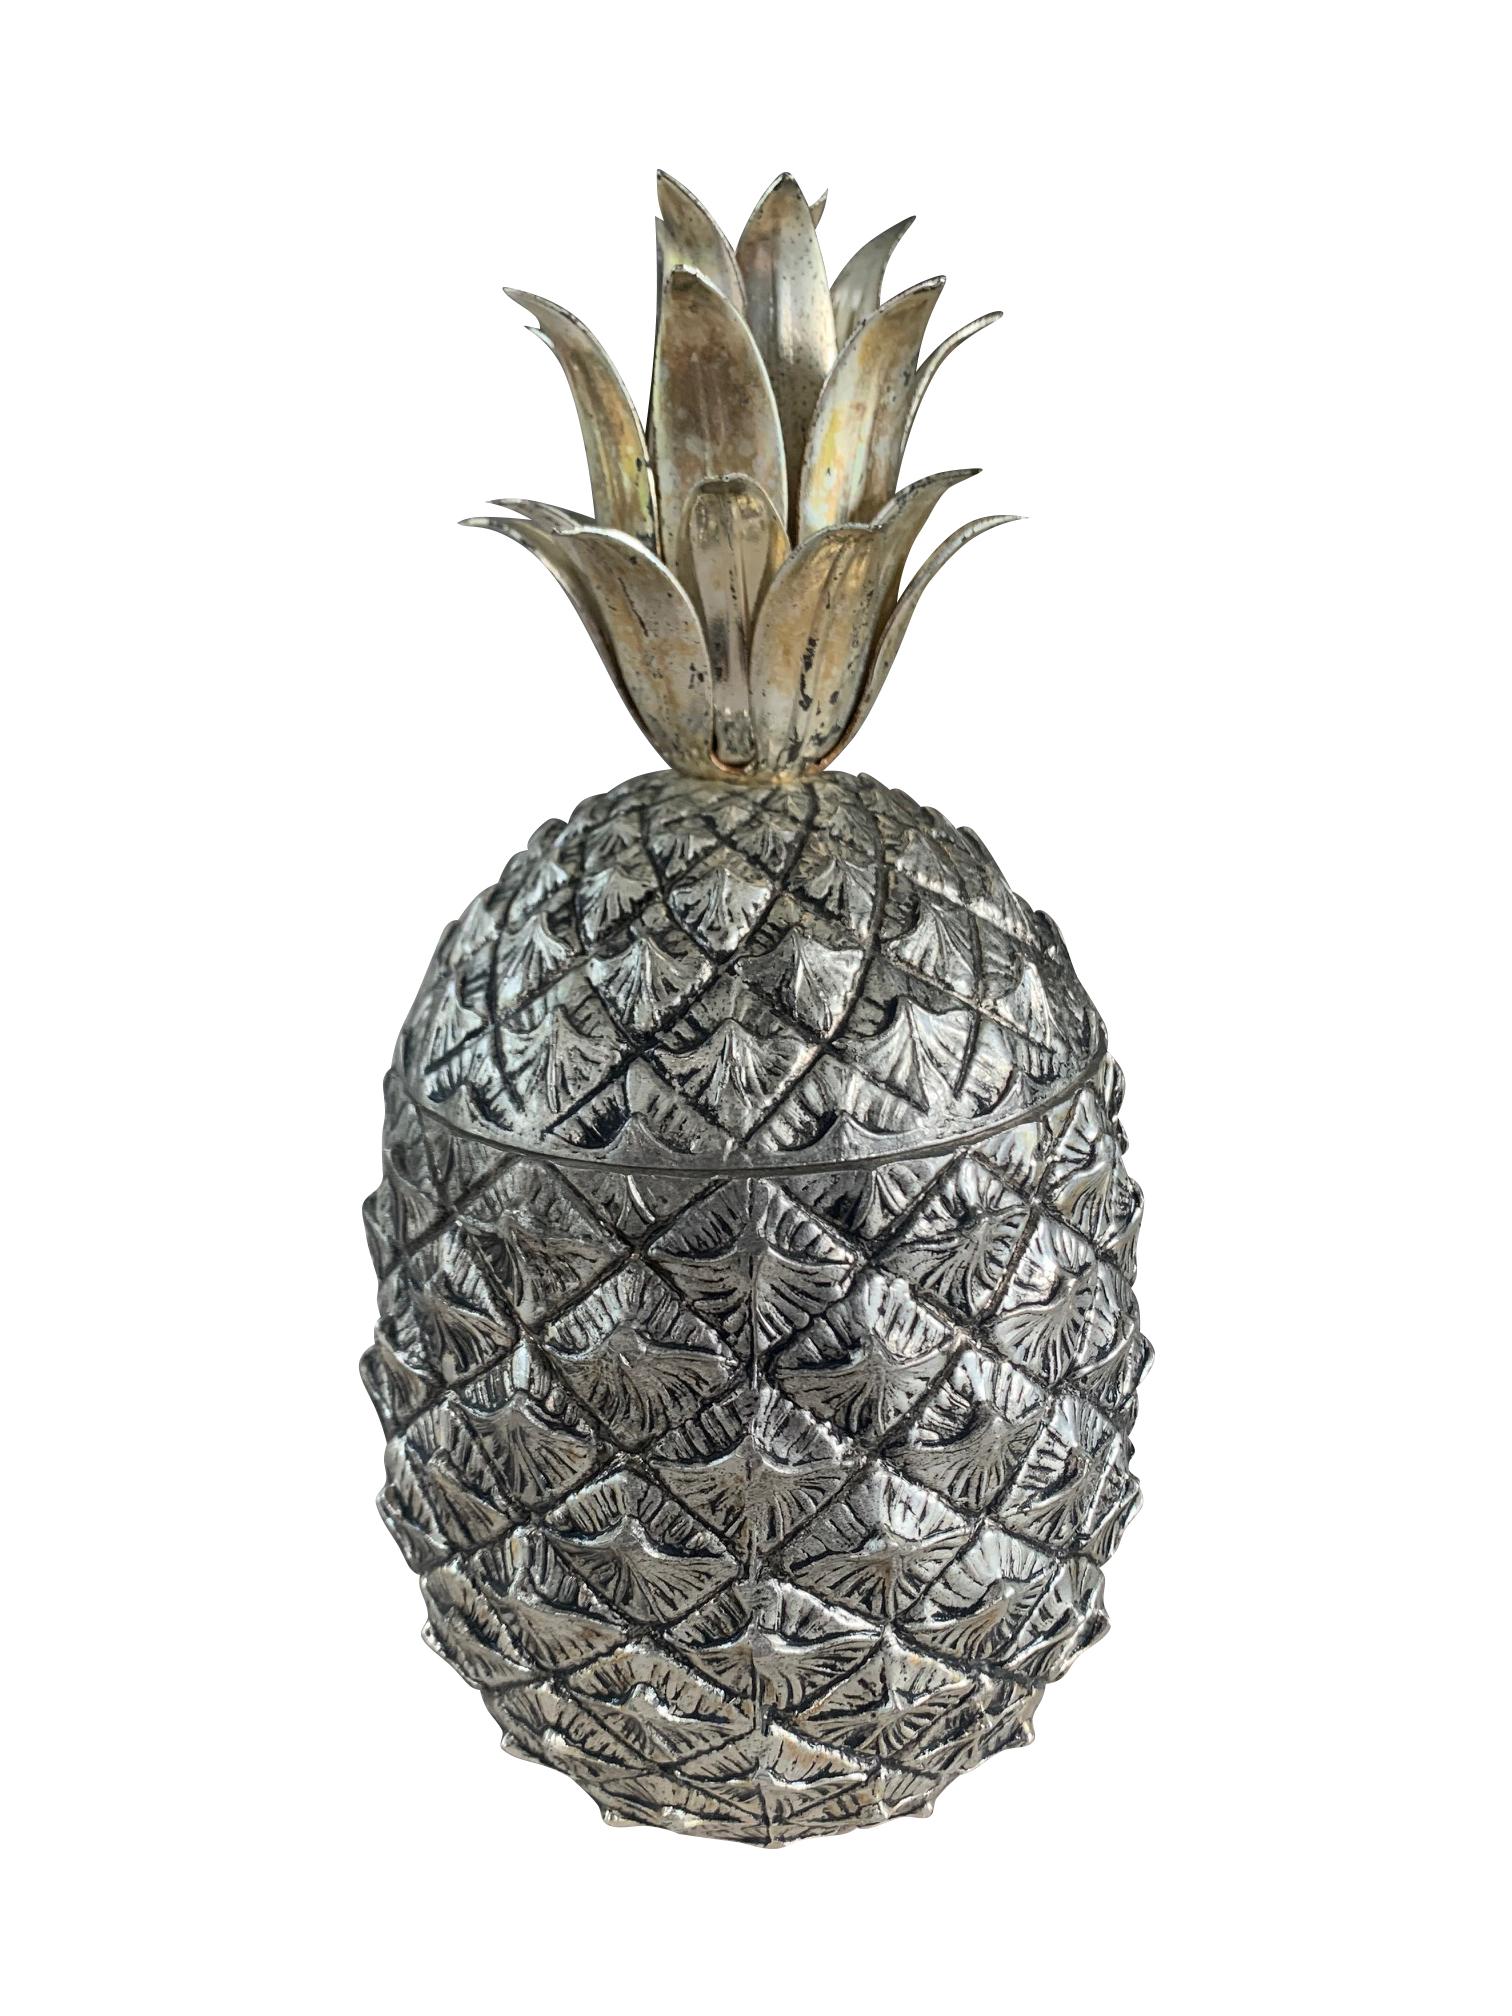 A 1960s Italian metal pineapple ice bucket by Mauro Manetti with gilt leaves and original metal liner. Designed for Fonderia D'Arte foundry, Firenze Italy and stamped on the base 